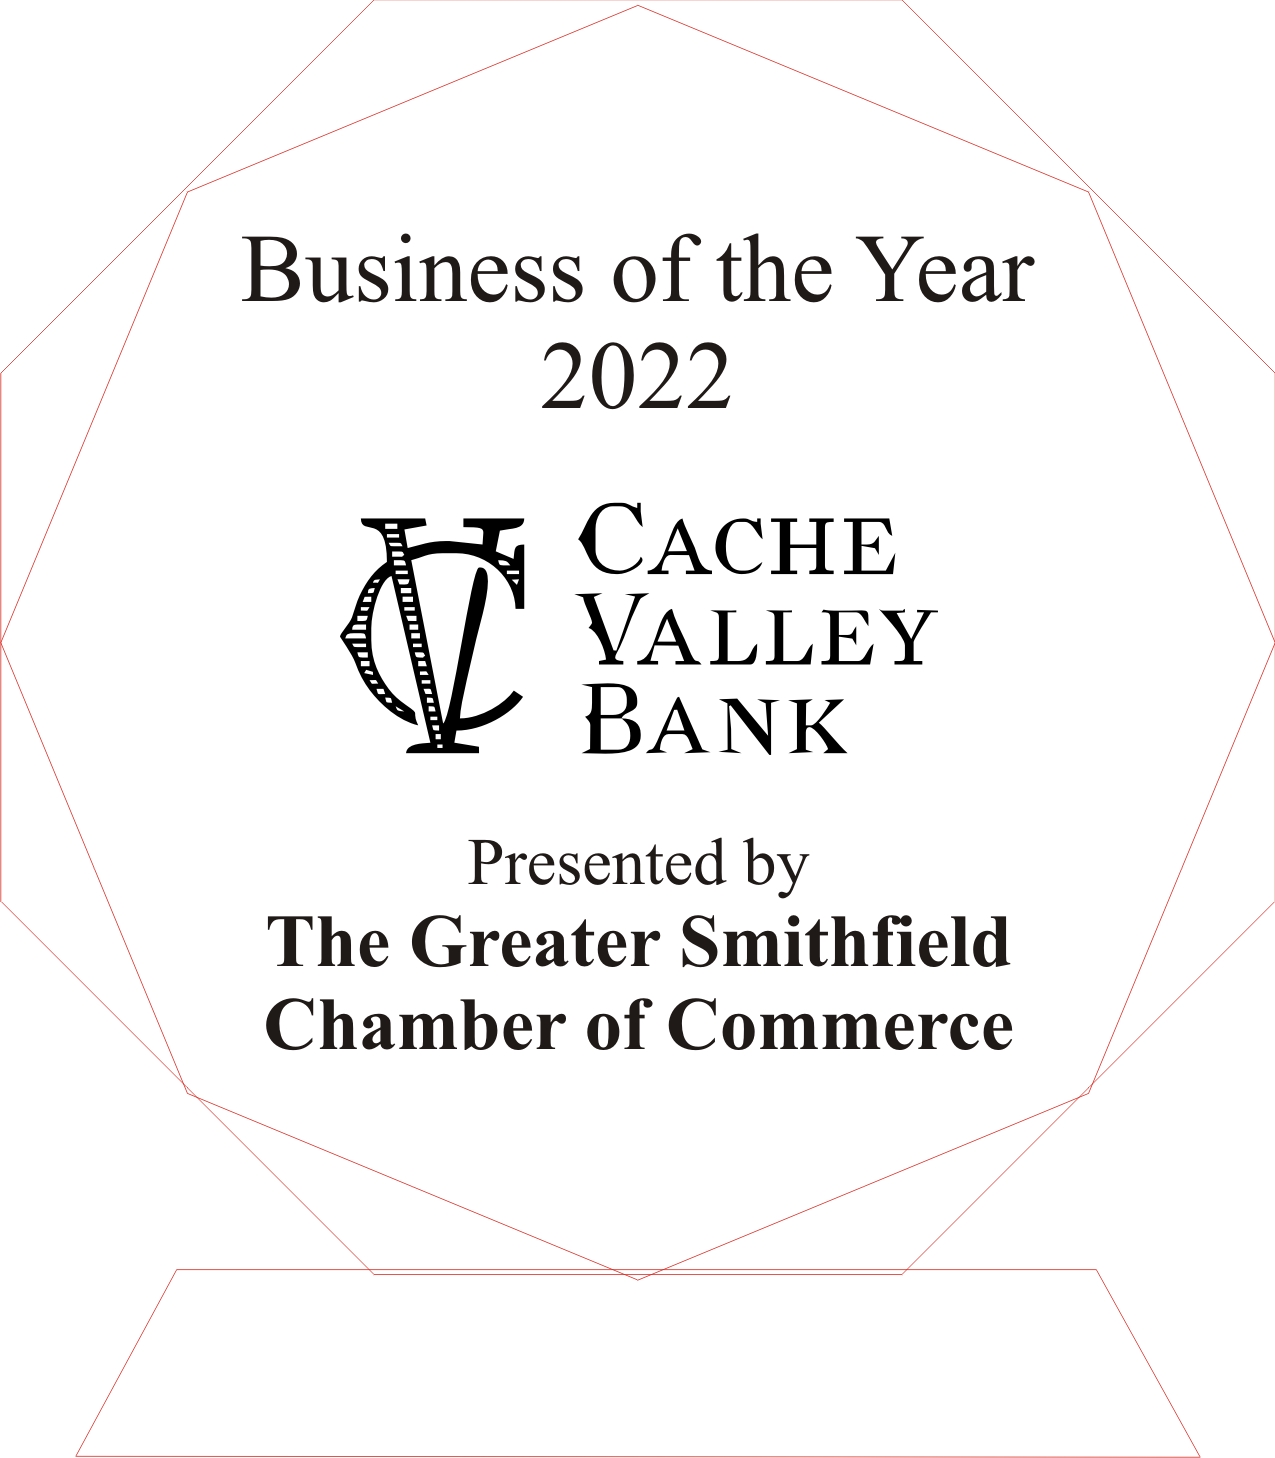 Business Of the Year award